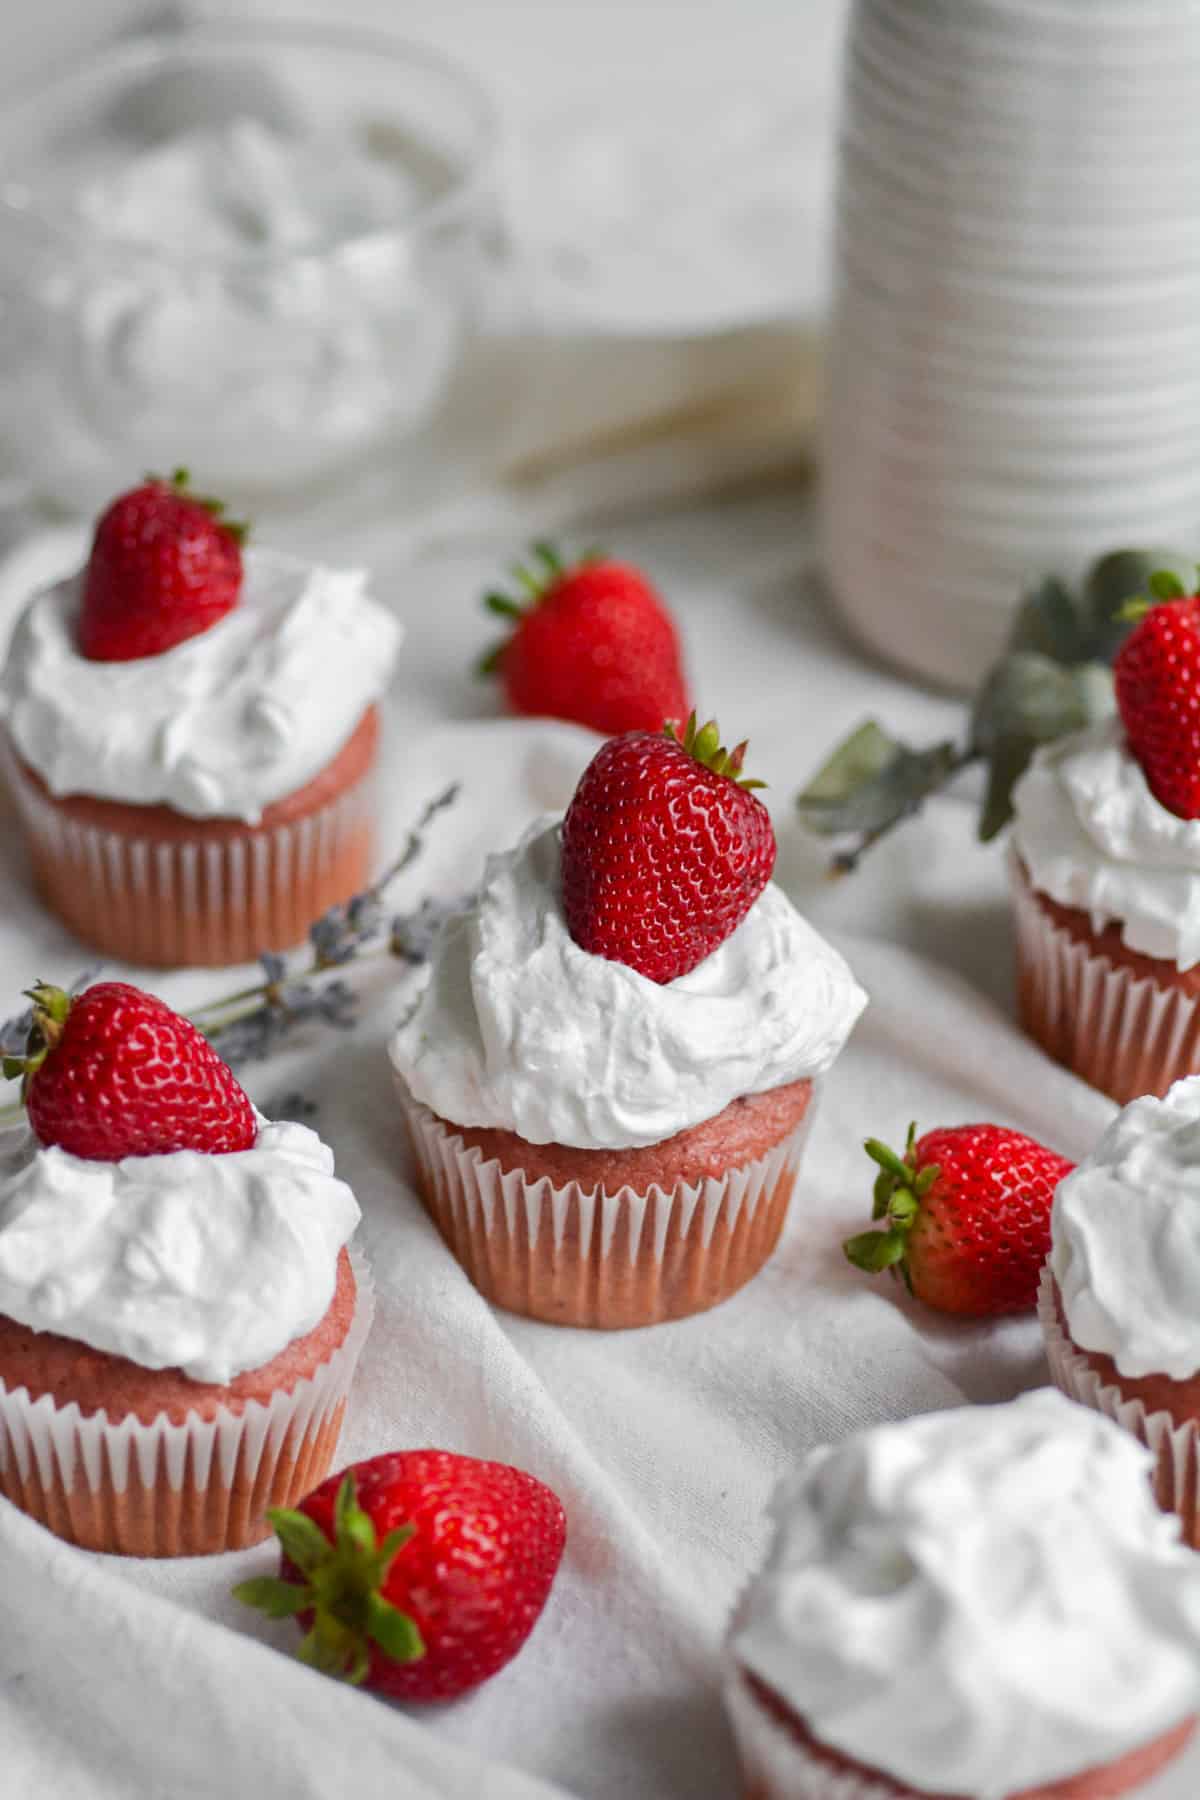 Vegan Strawberry and cream cupcakes topped with strawberries on a white cloth